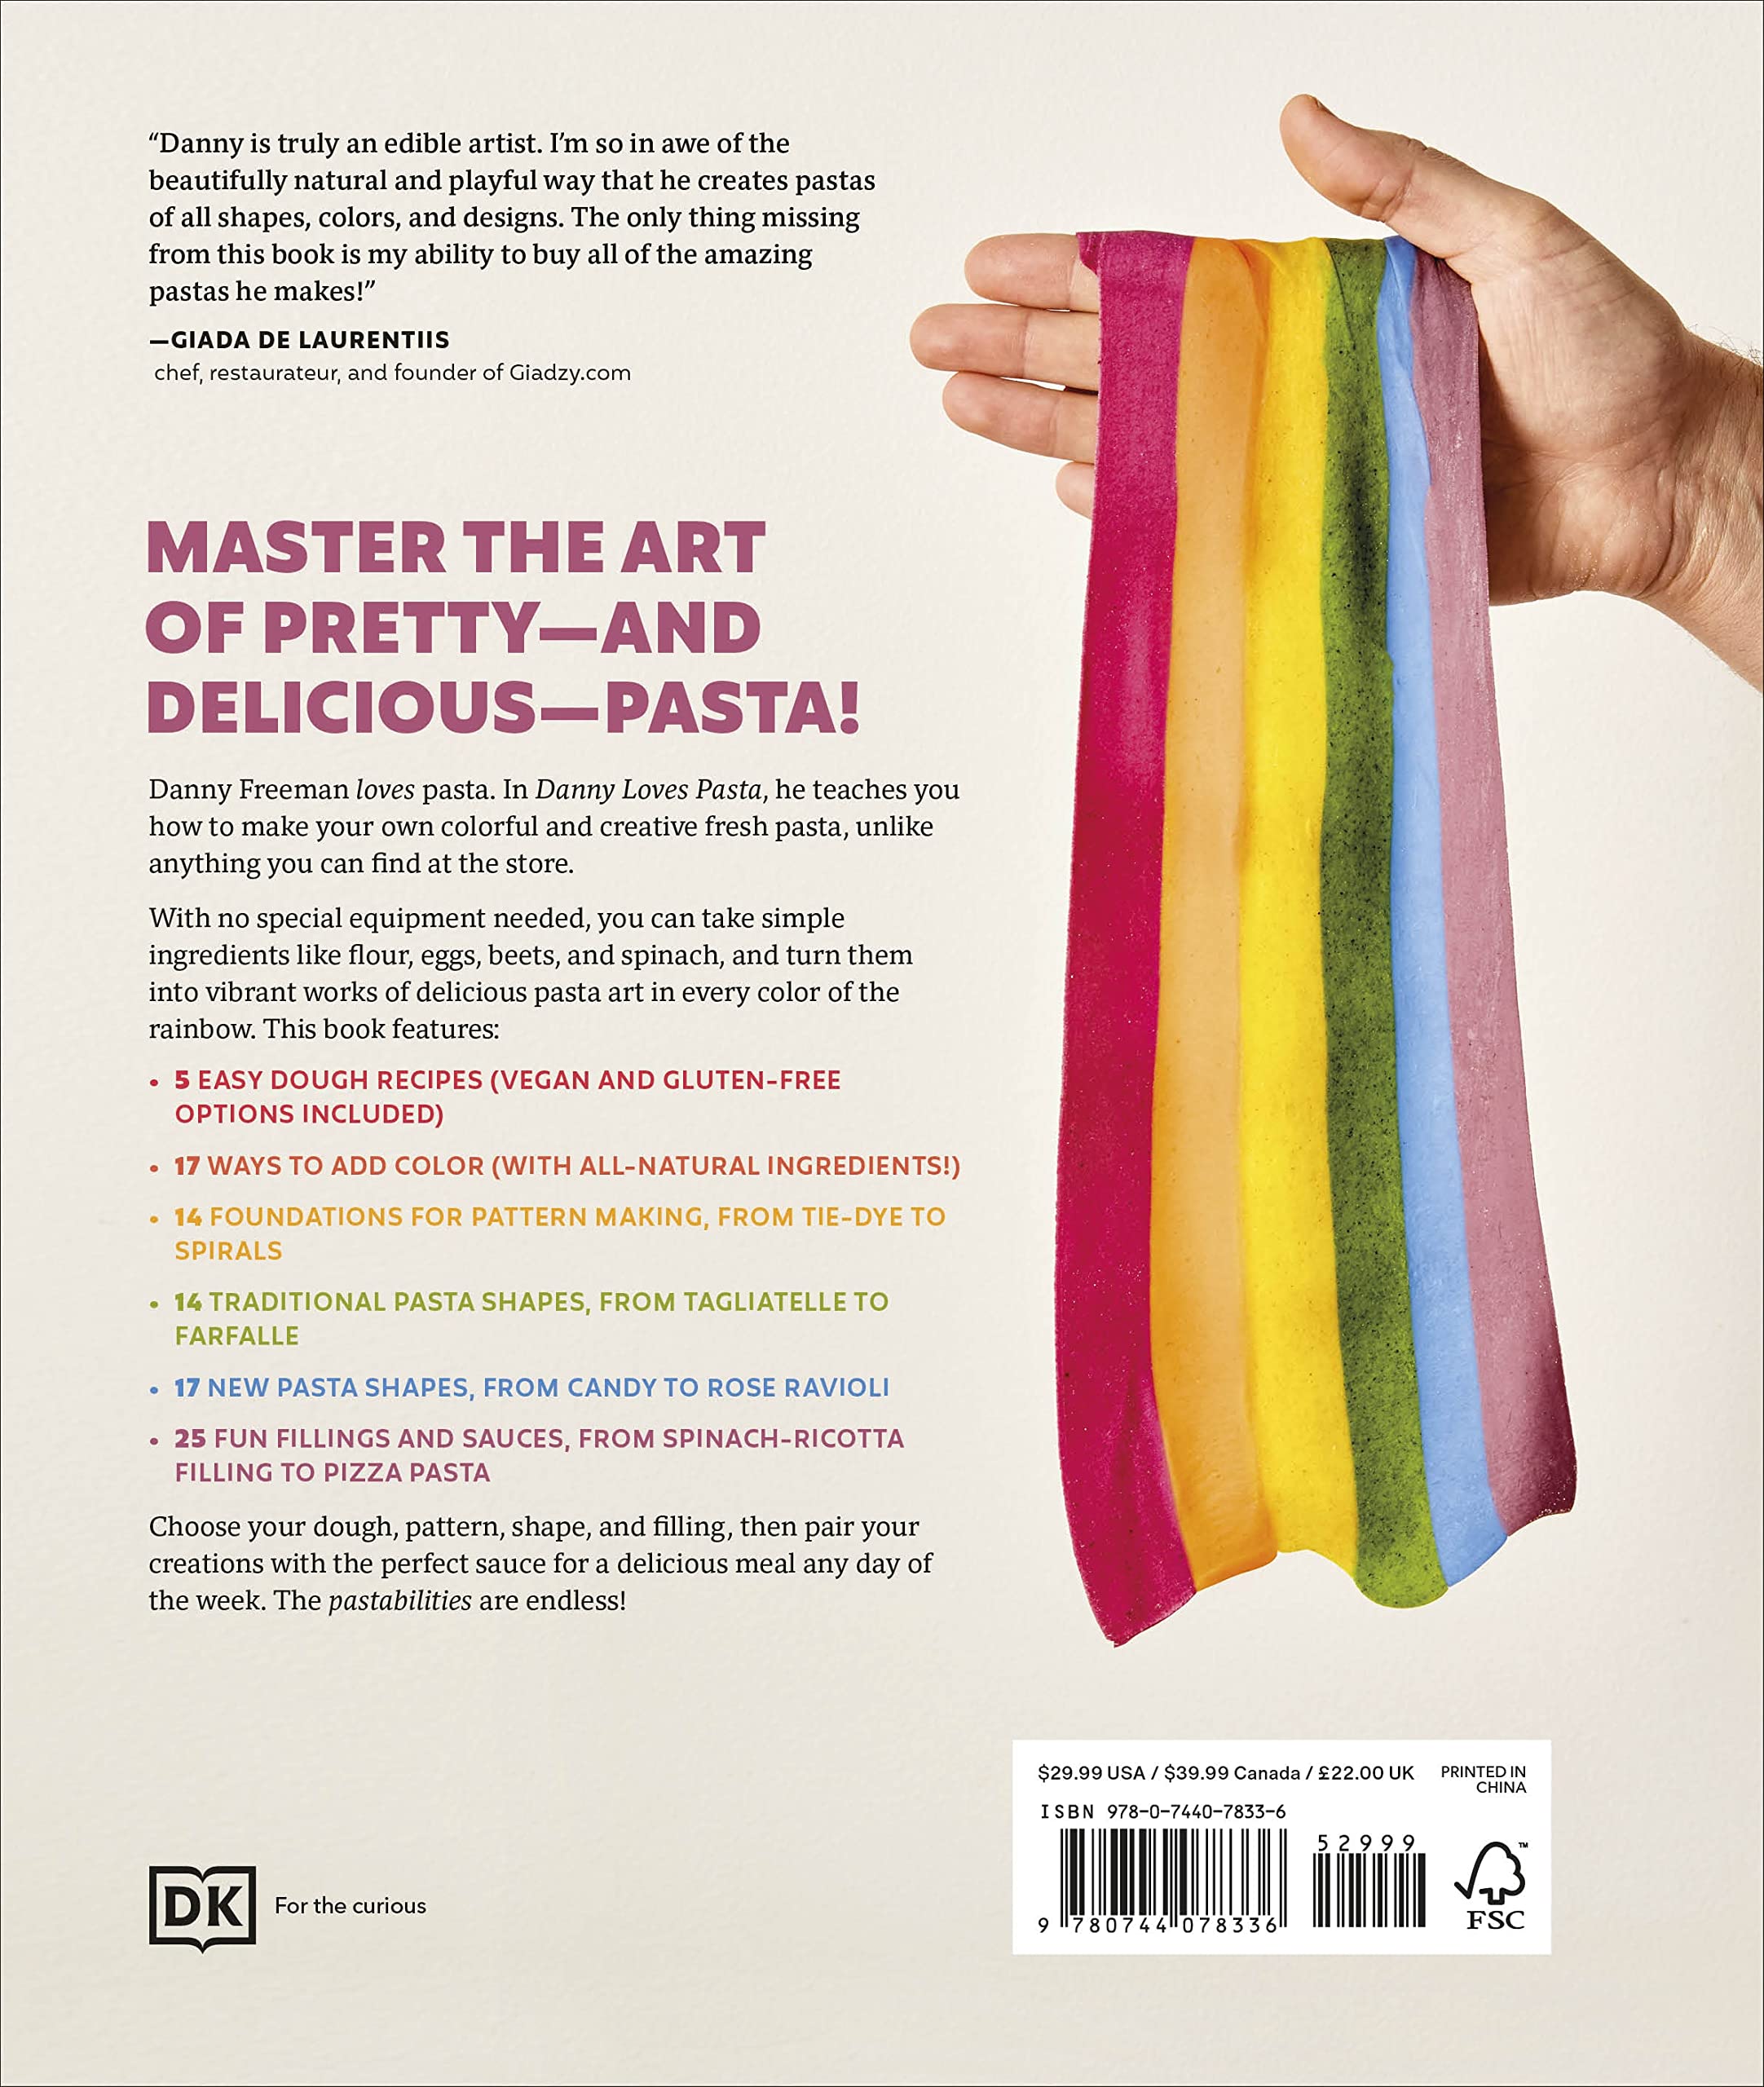 Danny Loves Pasta: 75+ fun and colorful pasta shapes, patterns, sauces, and more